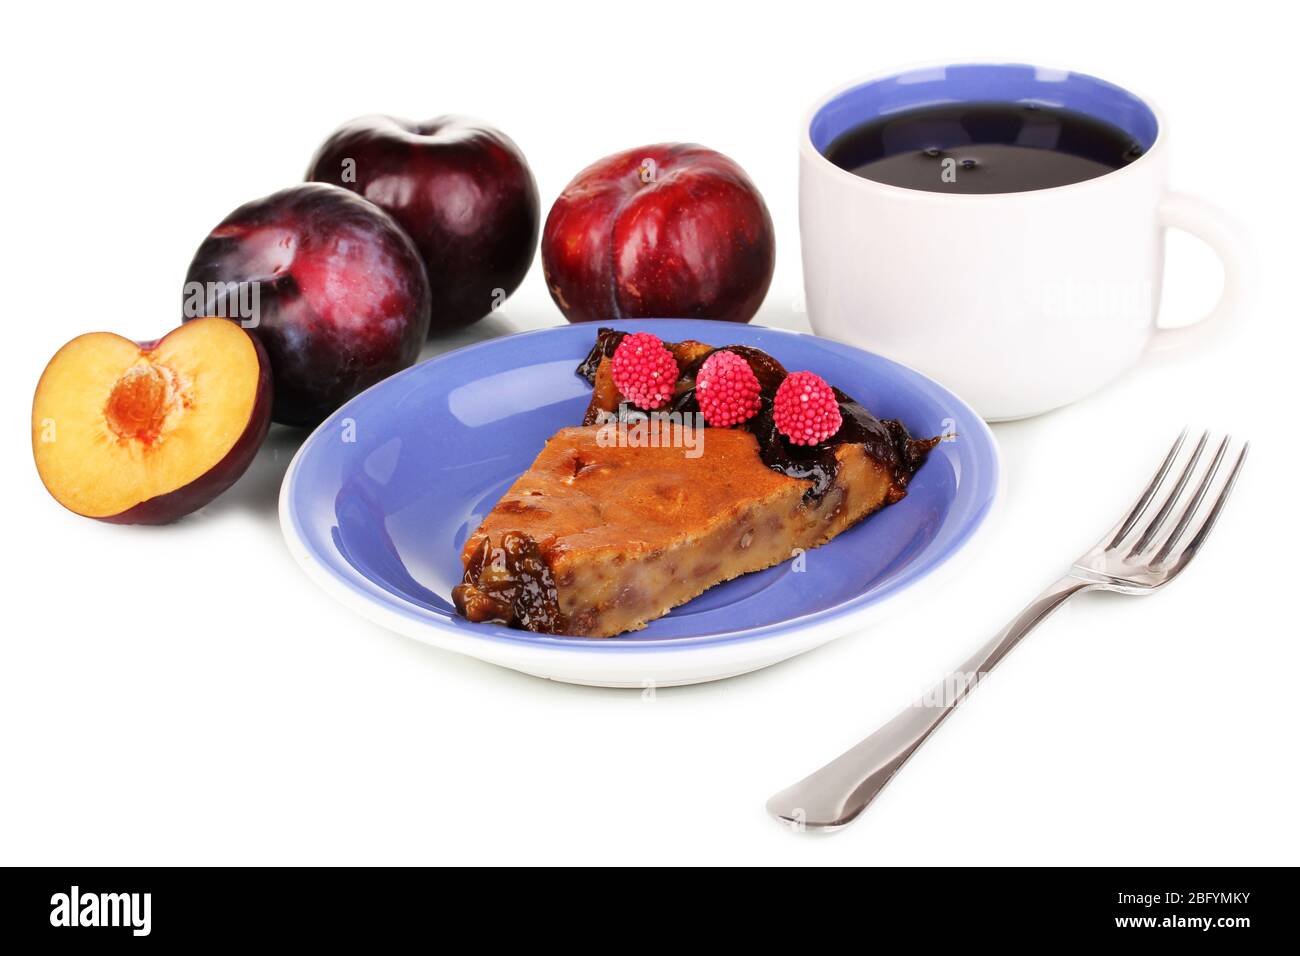 Tasty pie on blue plate with plums isolated on white Stock Photo